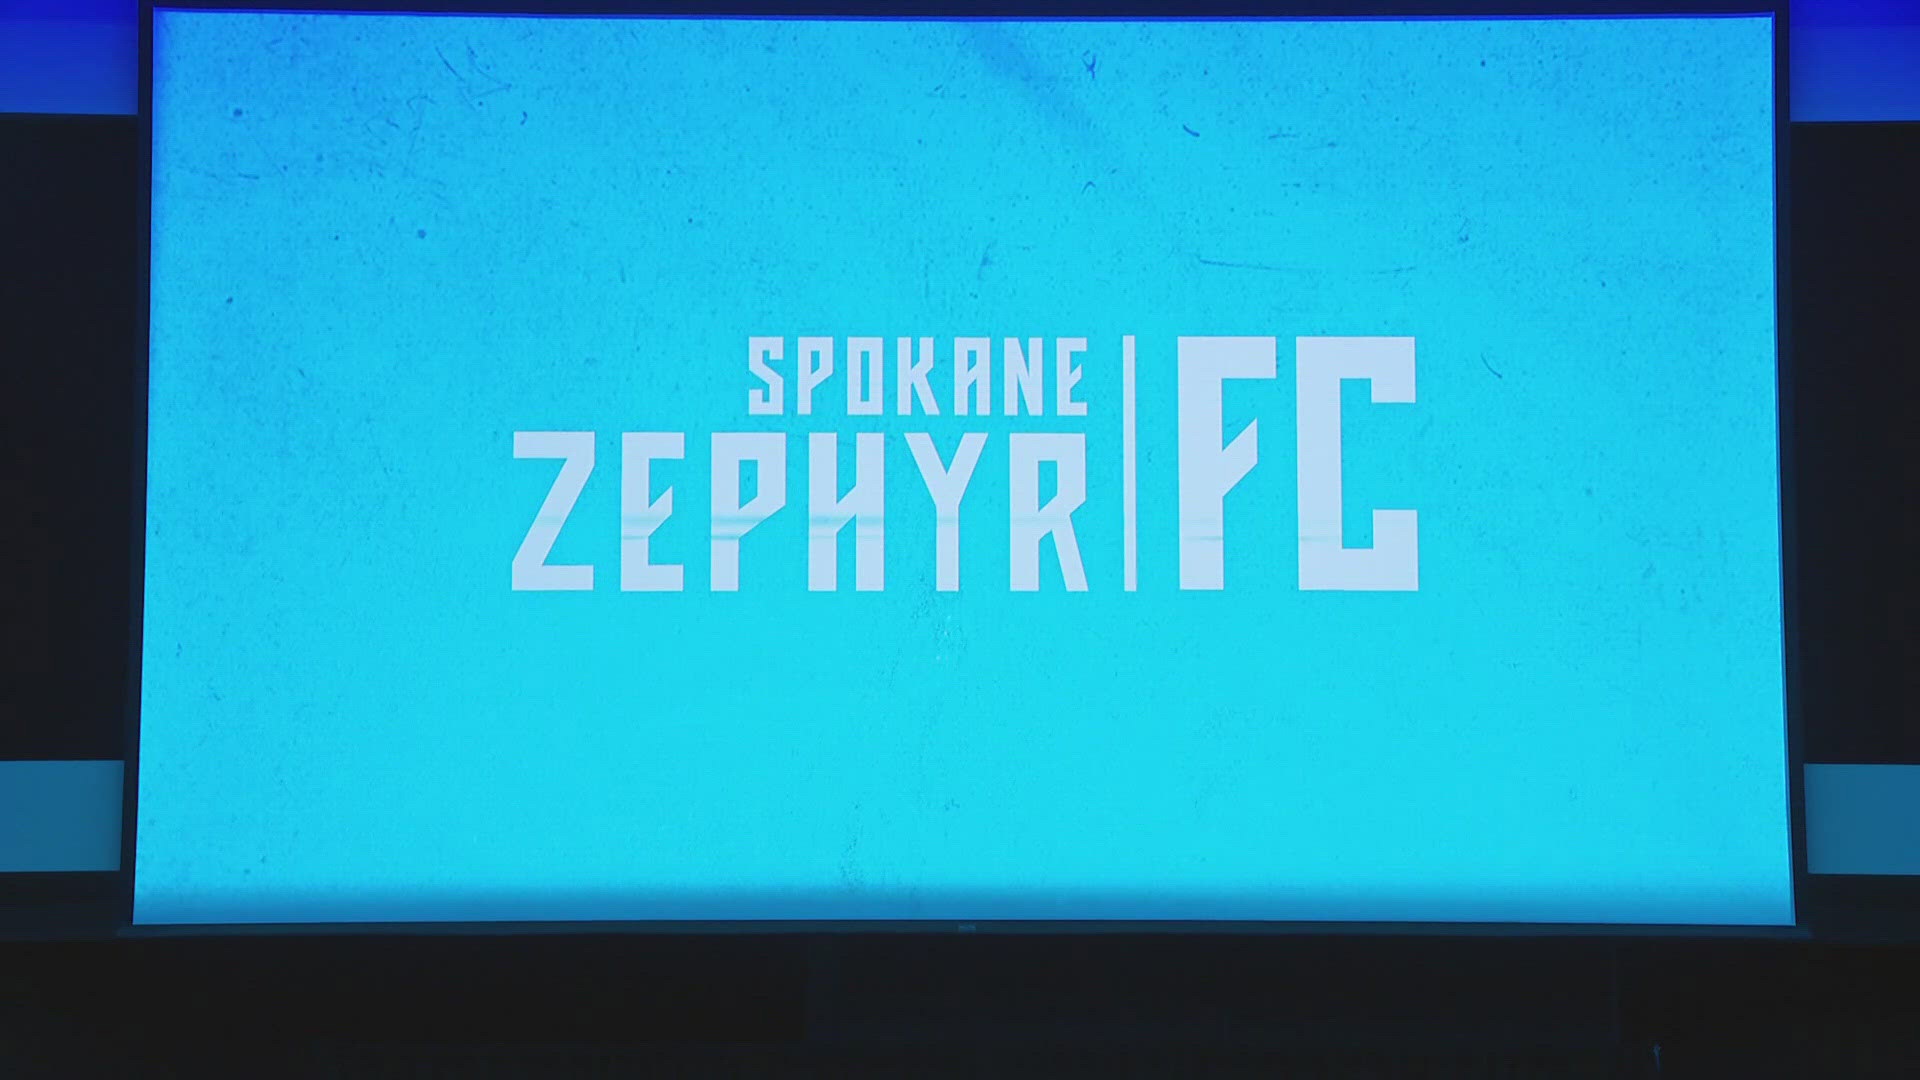 The Spokane Zephyr FC announced they will host Fort Lauderdale Union FC at One Spokane Stadium on Saturday, August 17.